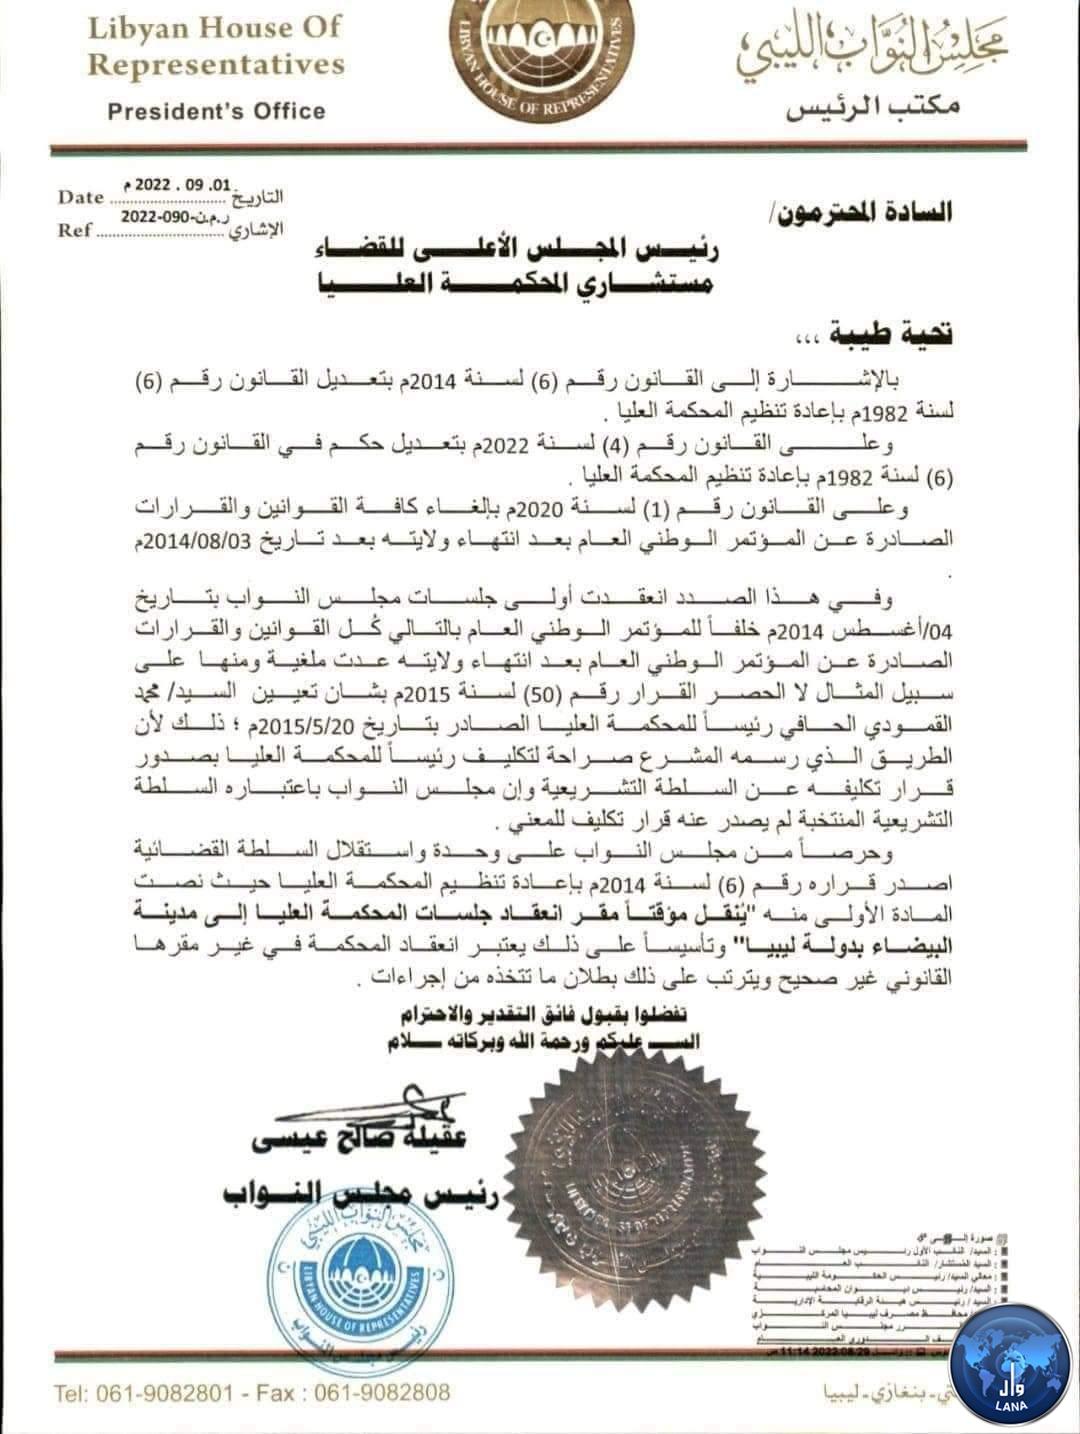 House of Representatives: Temporarily moving seat of the High Court meetings to the city of Al Baidha.